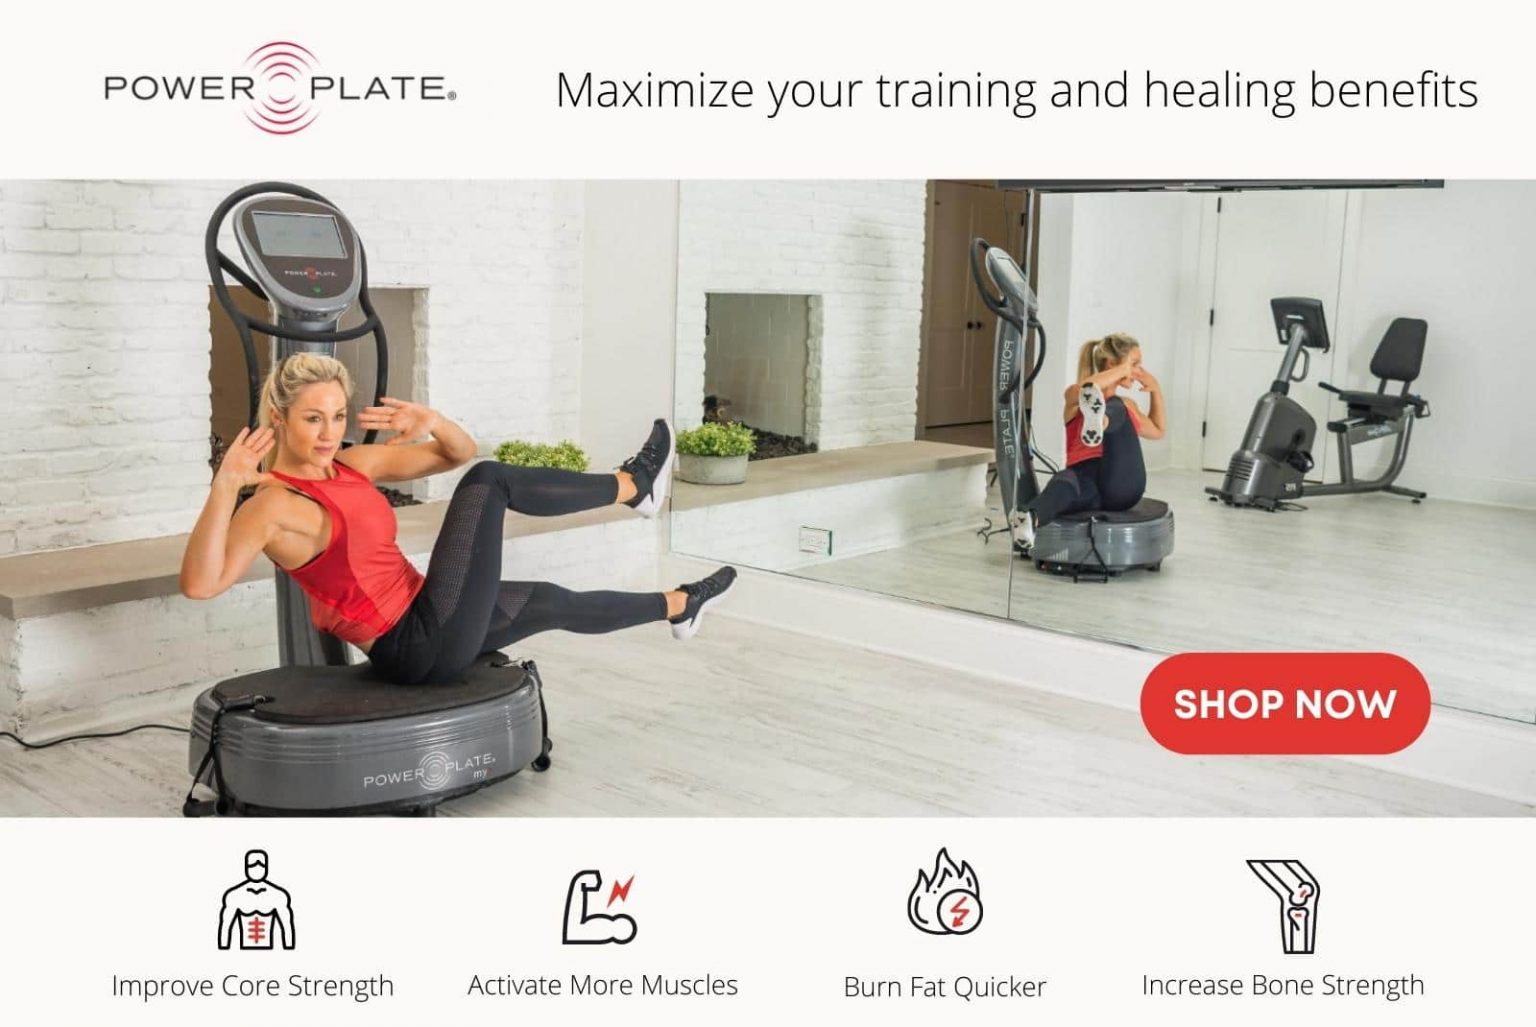 Maximize your training and health benefits with the power plate my7